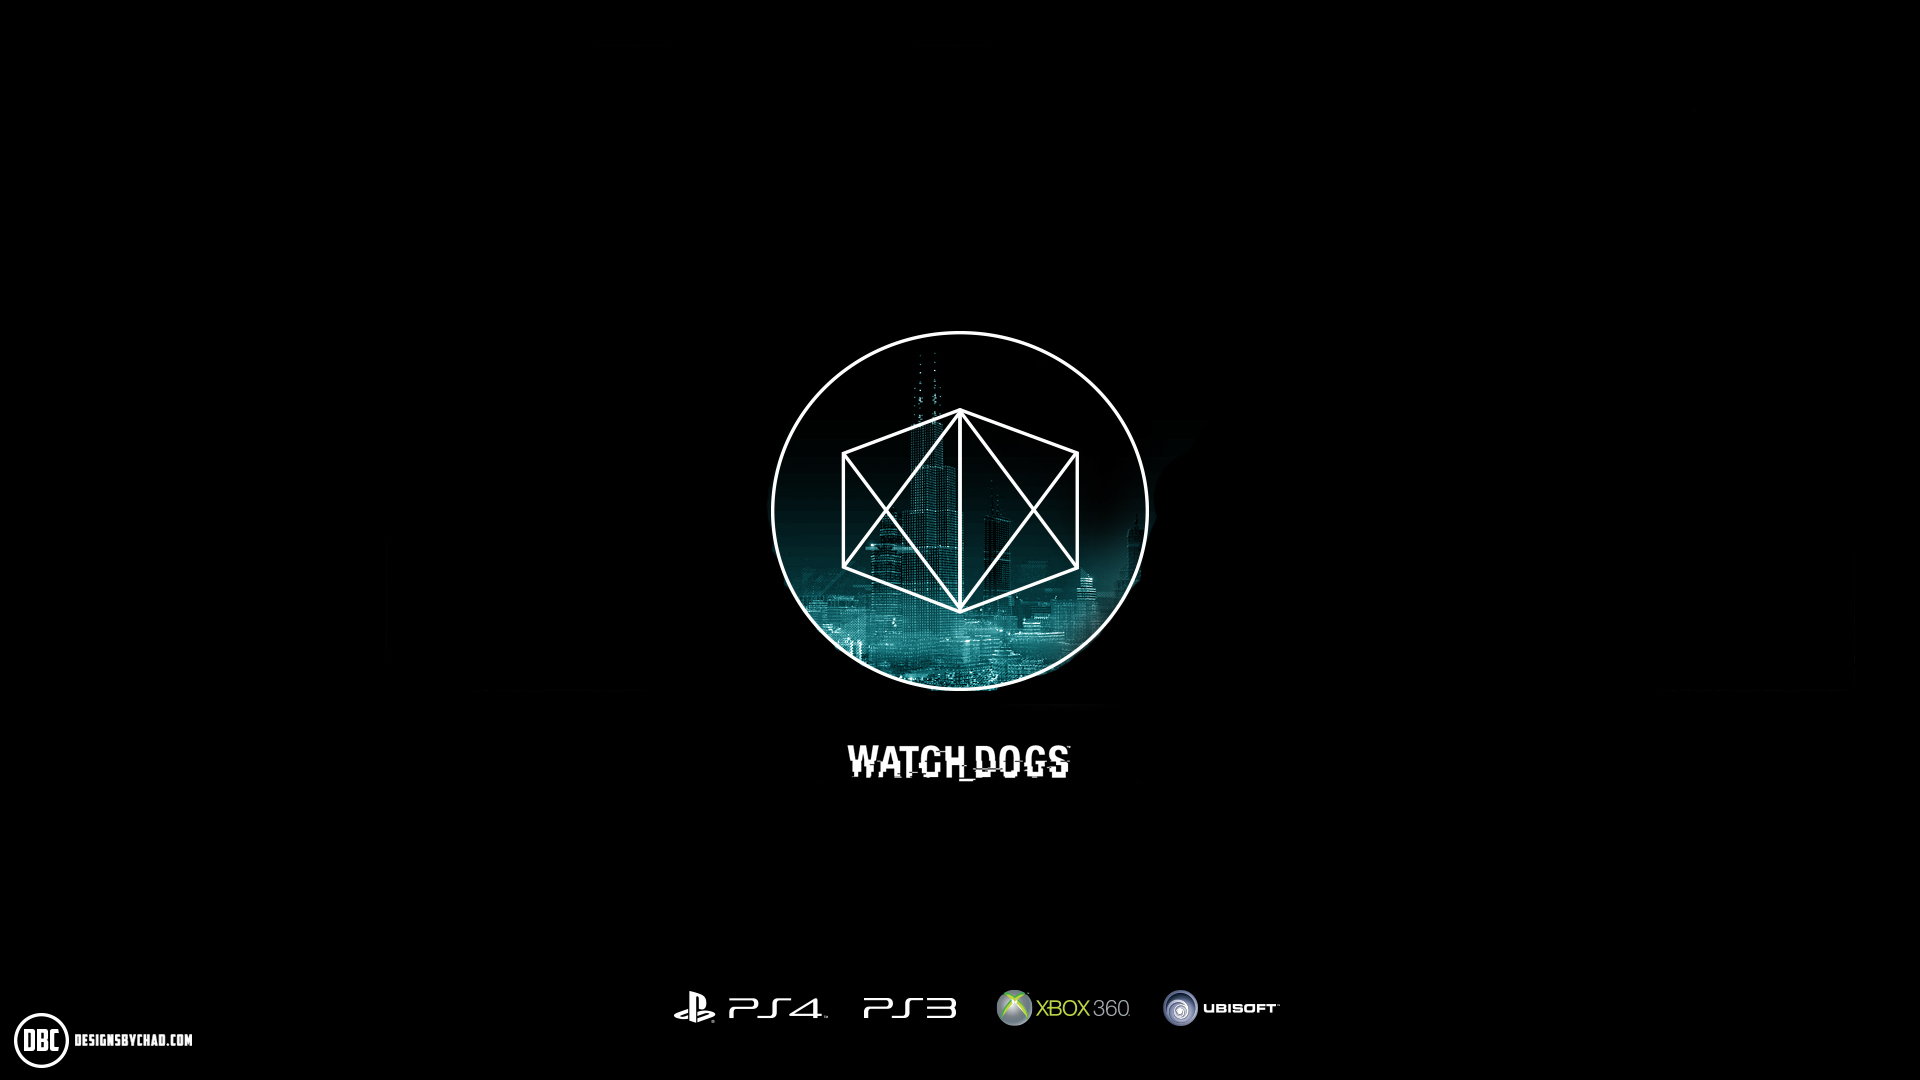 45] Watch Dogs Hacking Wallpaper on